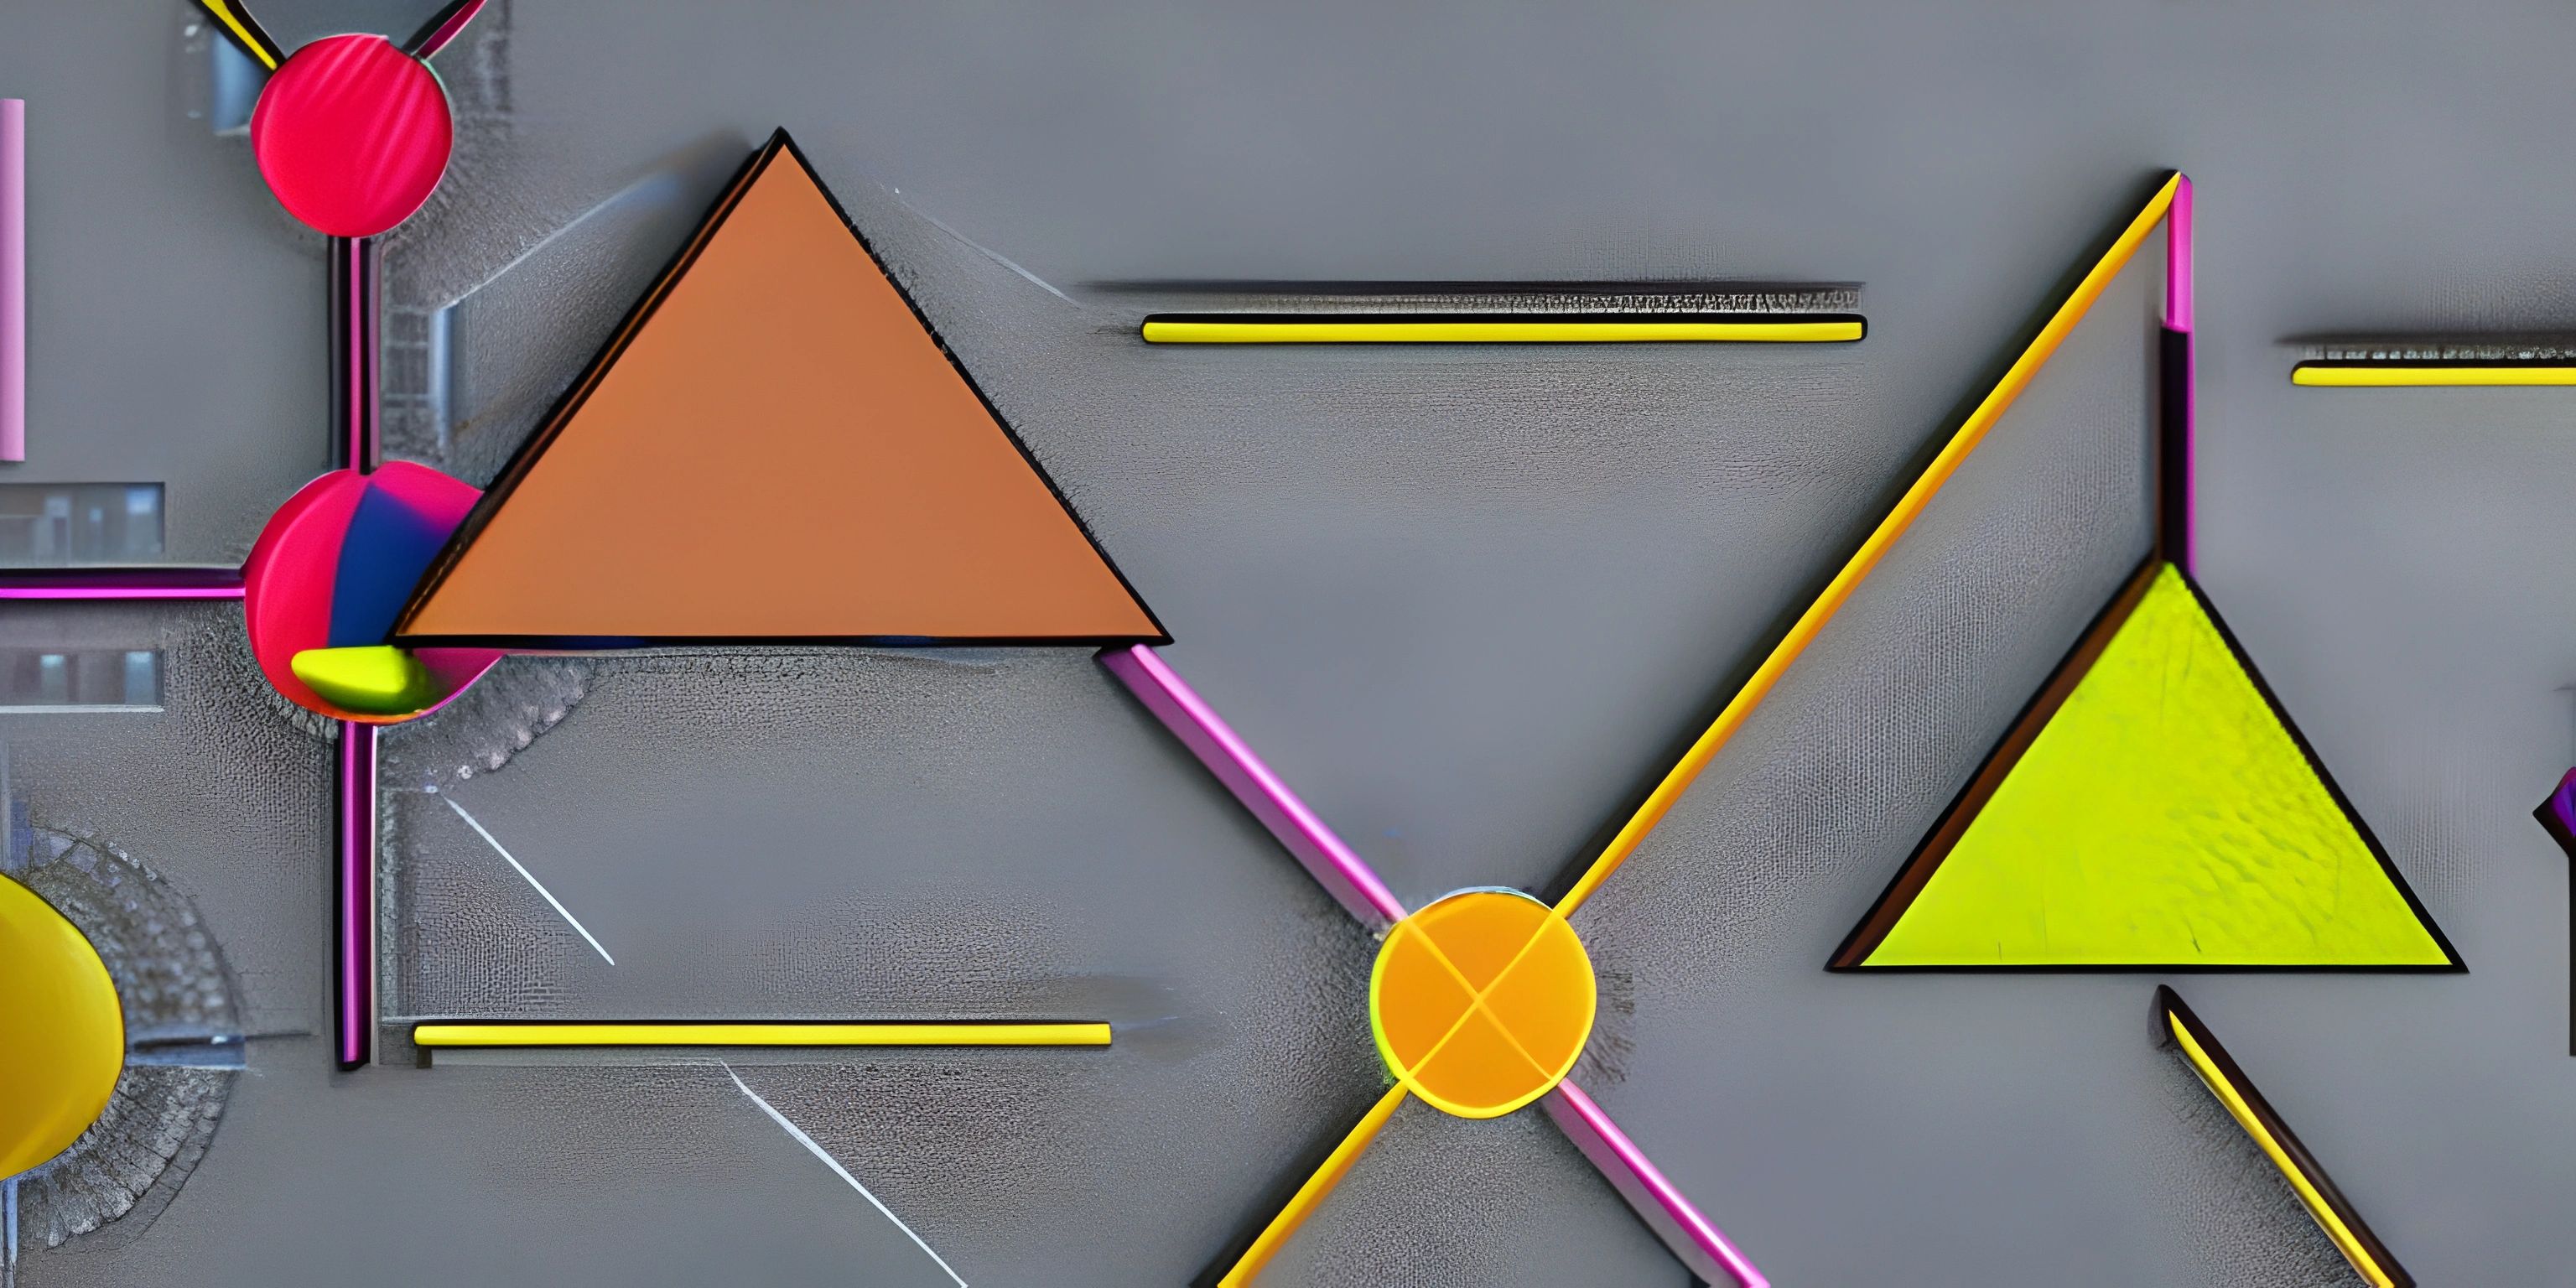 a bunch of neon colored geometric objects on a gray surface a few red, two yellow, two pink and orange